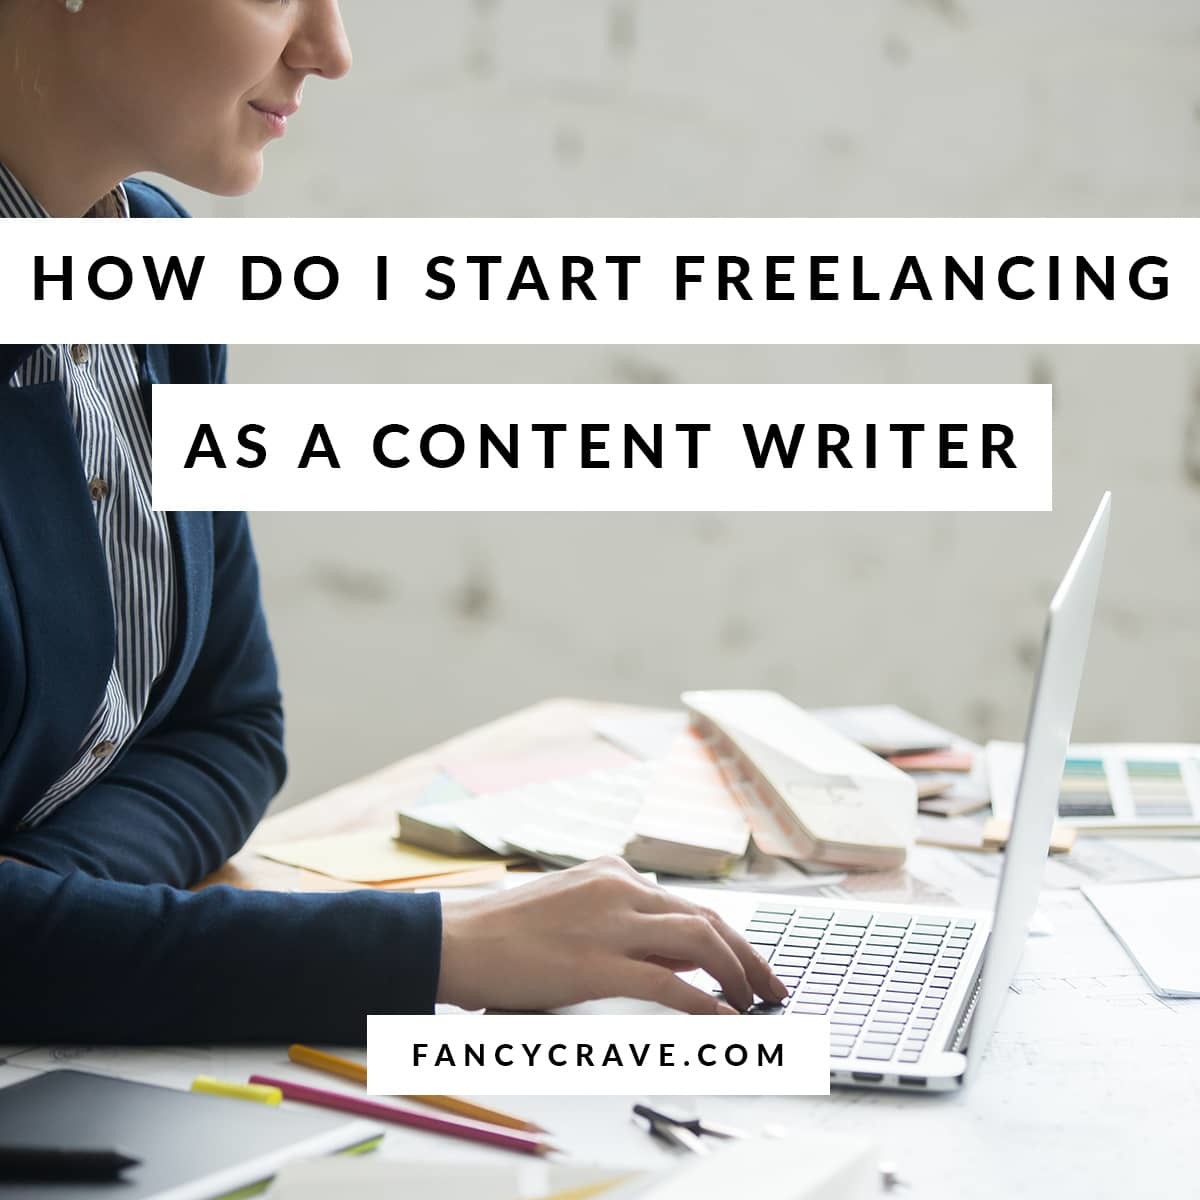 Freelancing as a Content Writer